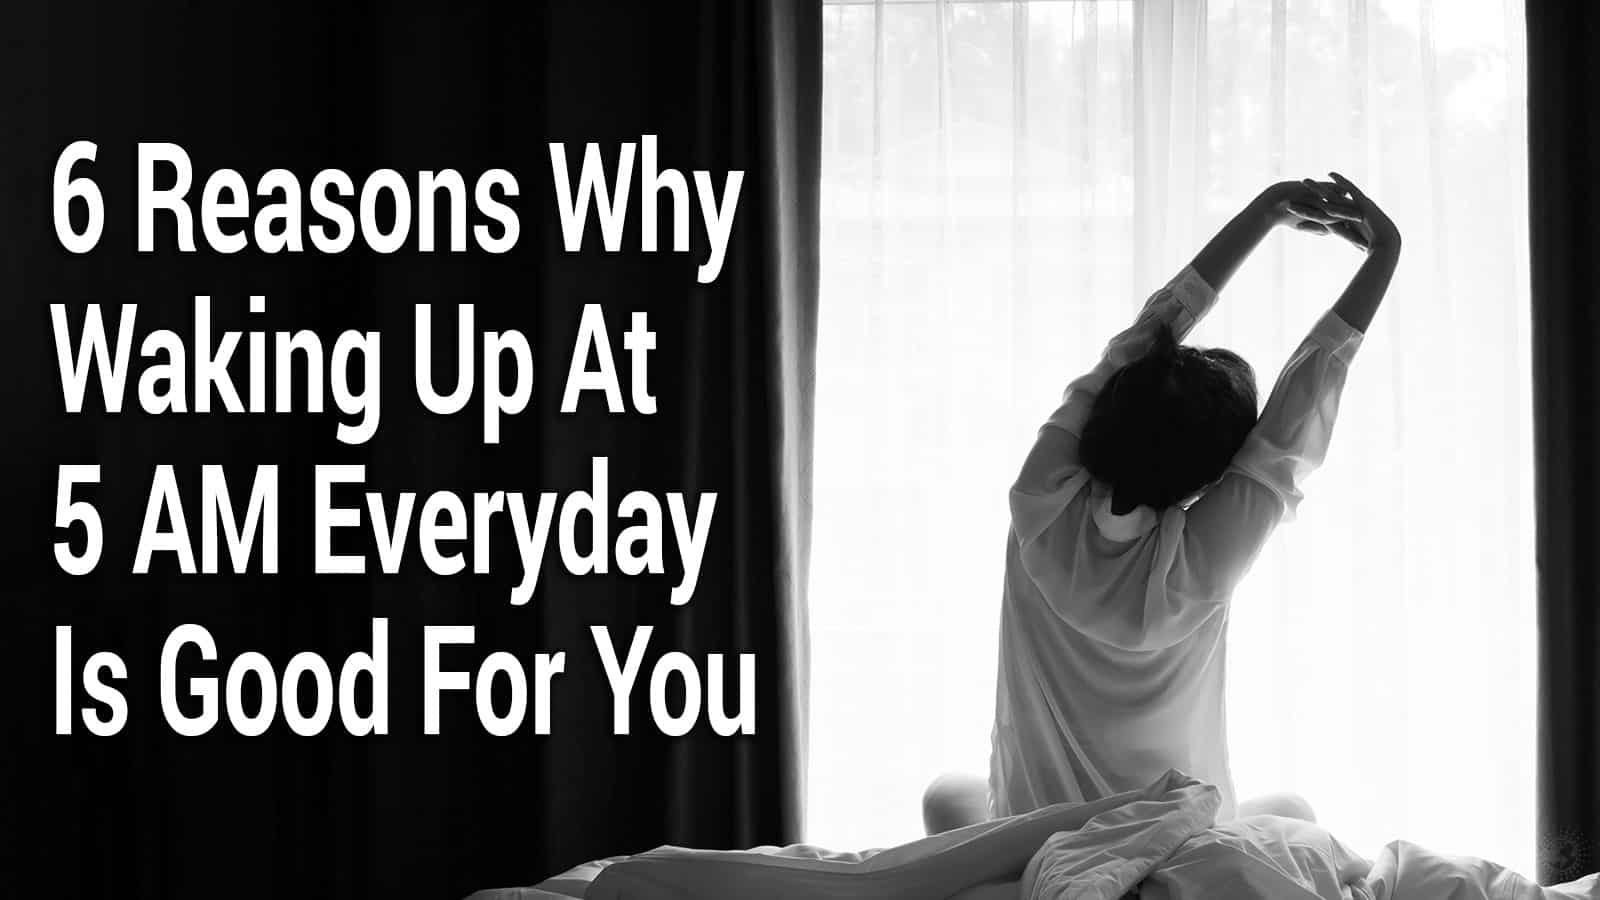 6 Reasons Why Waking Up At 5 AM Everyday Is Good For You